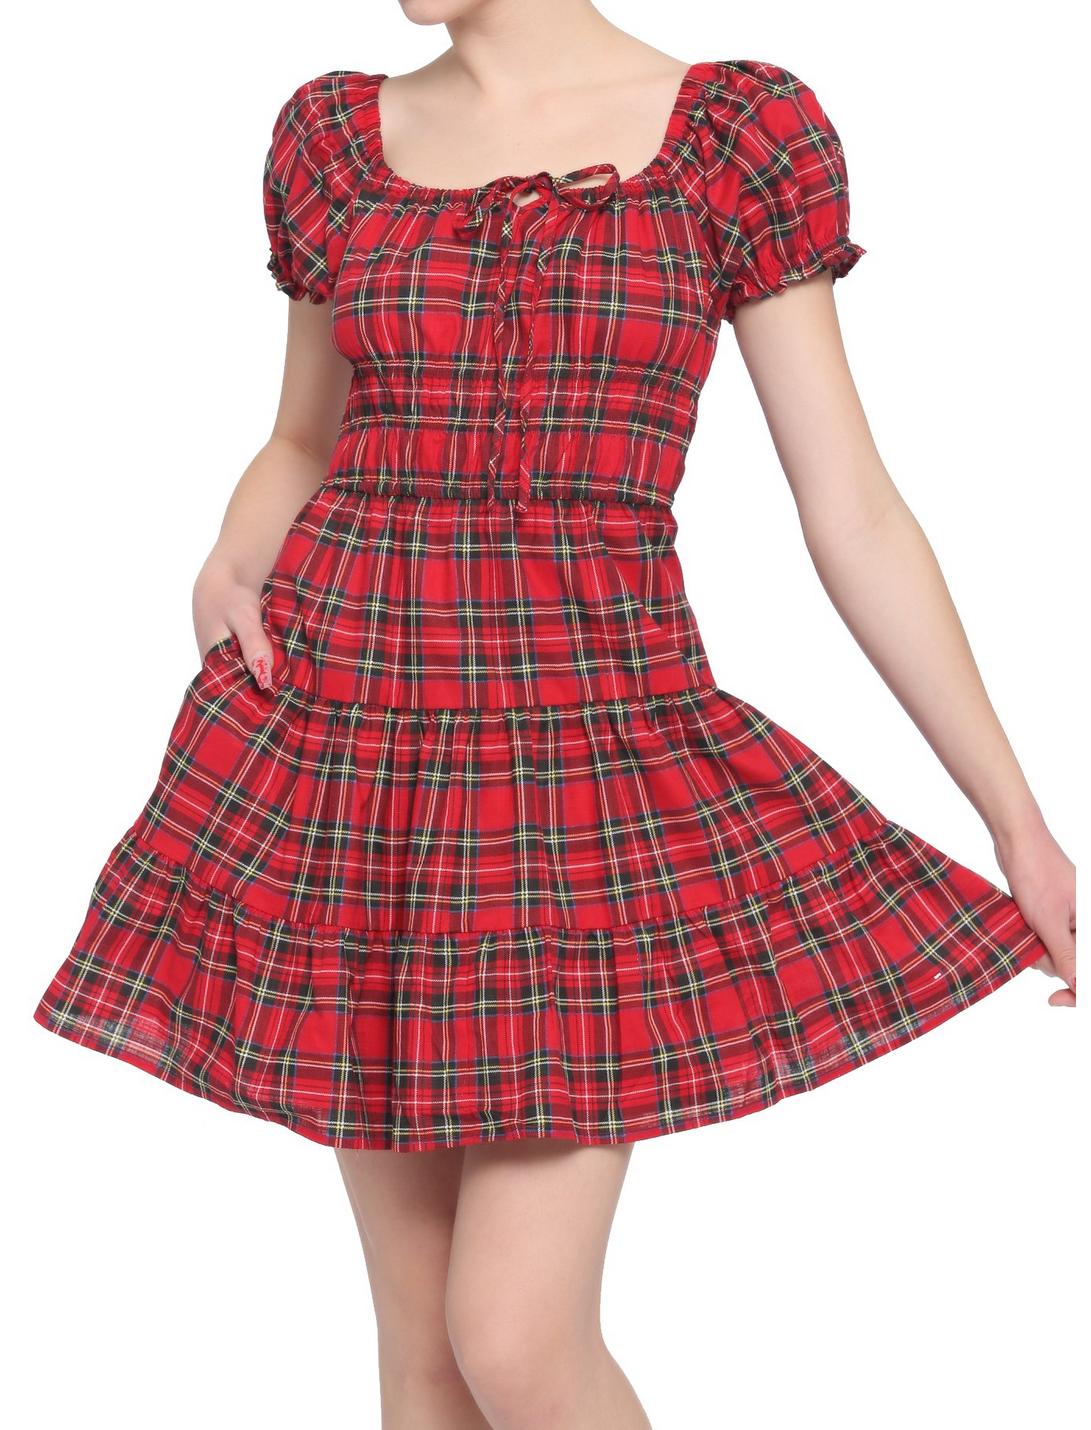 Red Plaid Tie-Front Babydoll Dress, PLAID - RED, hi-res